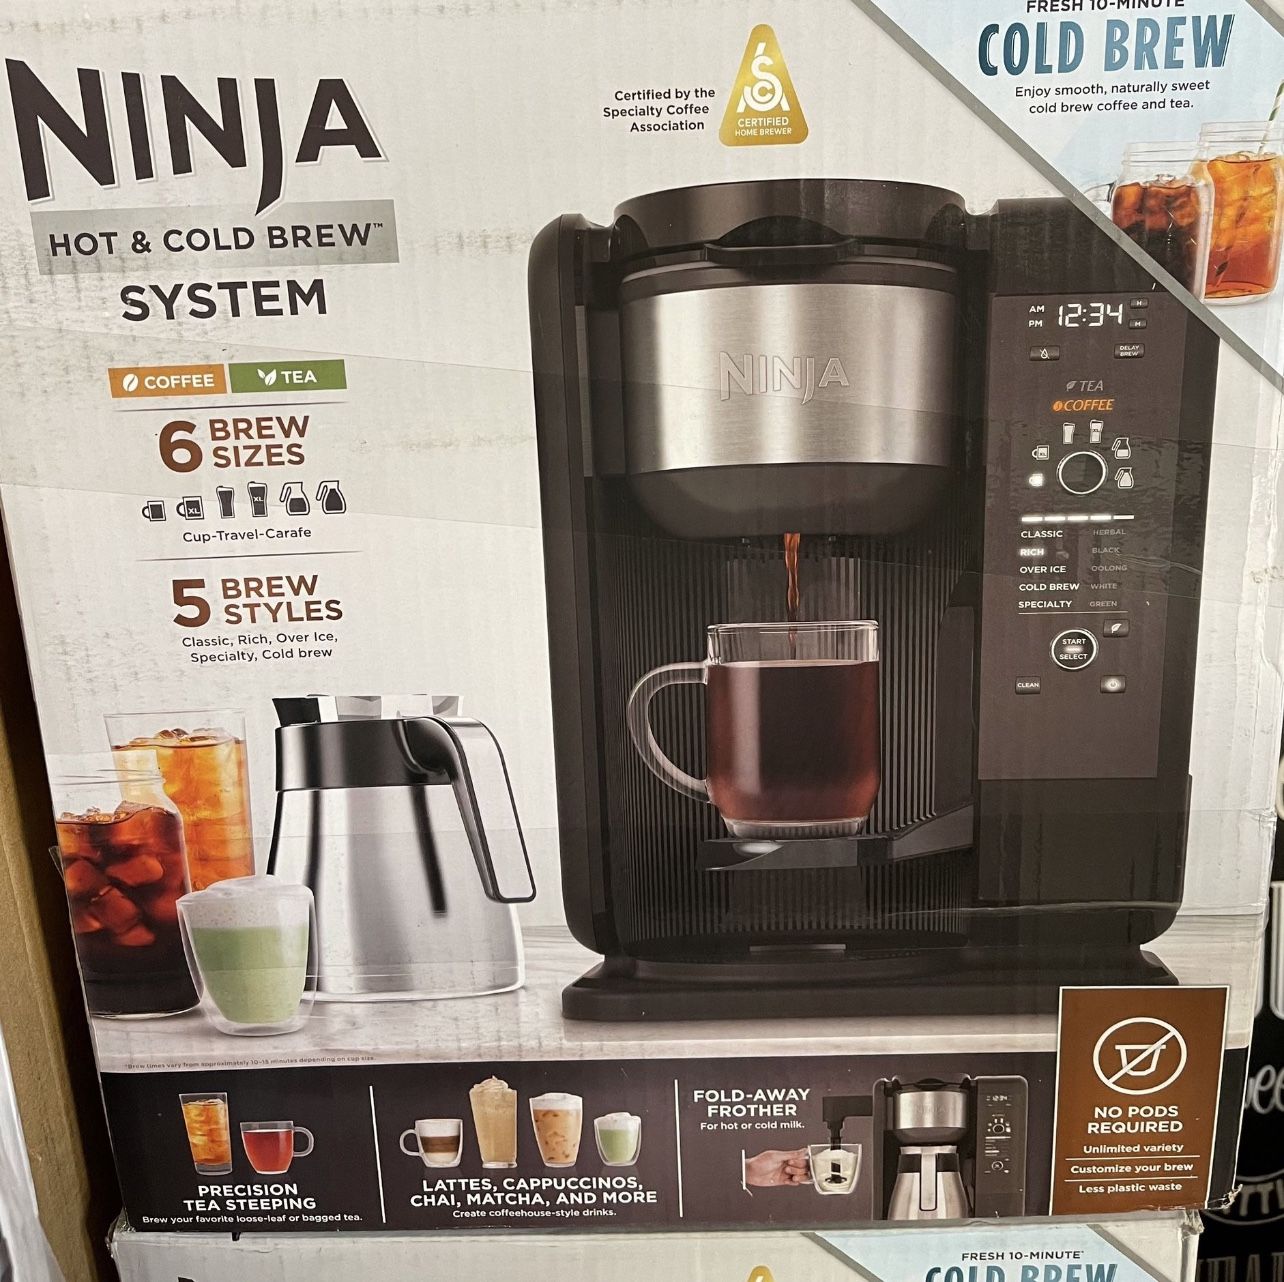 Ninja 50 oz. Hot and Cold Brew System Thermal Carafe at Tractor